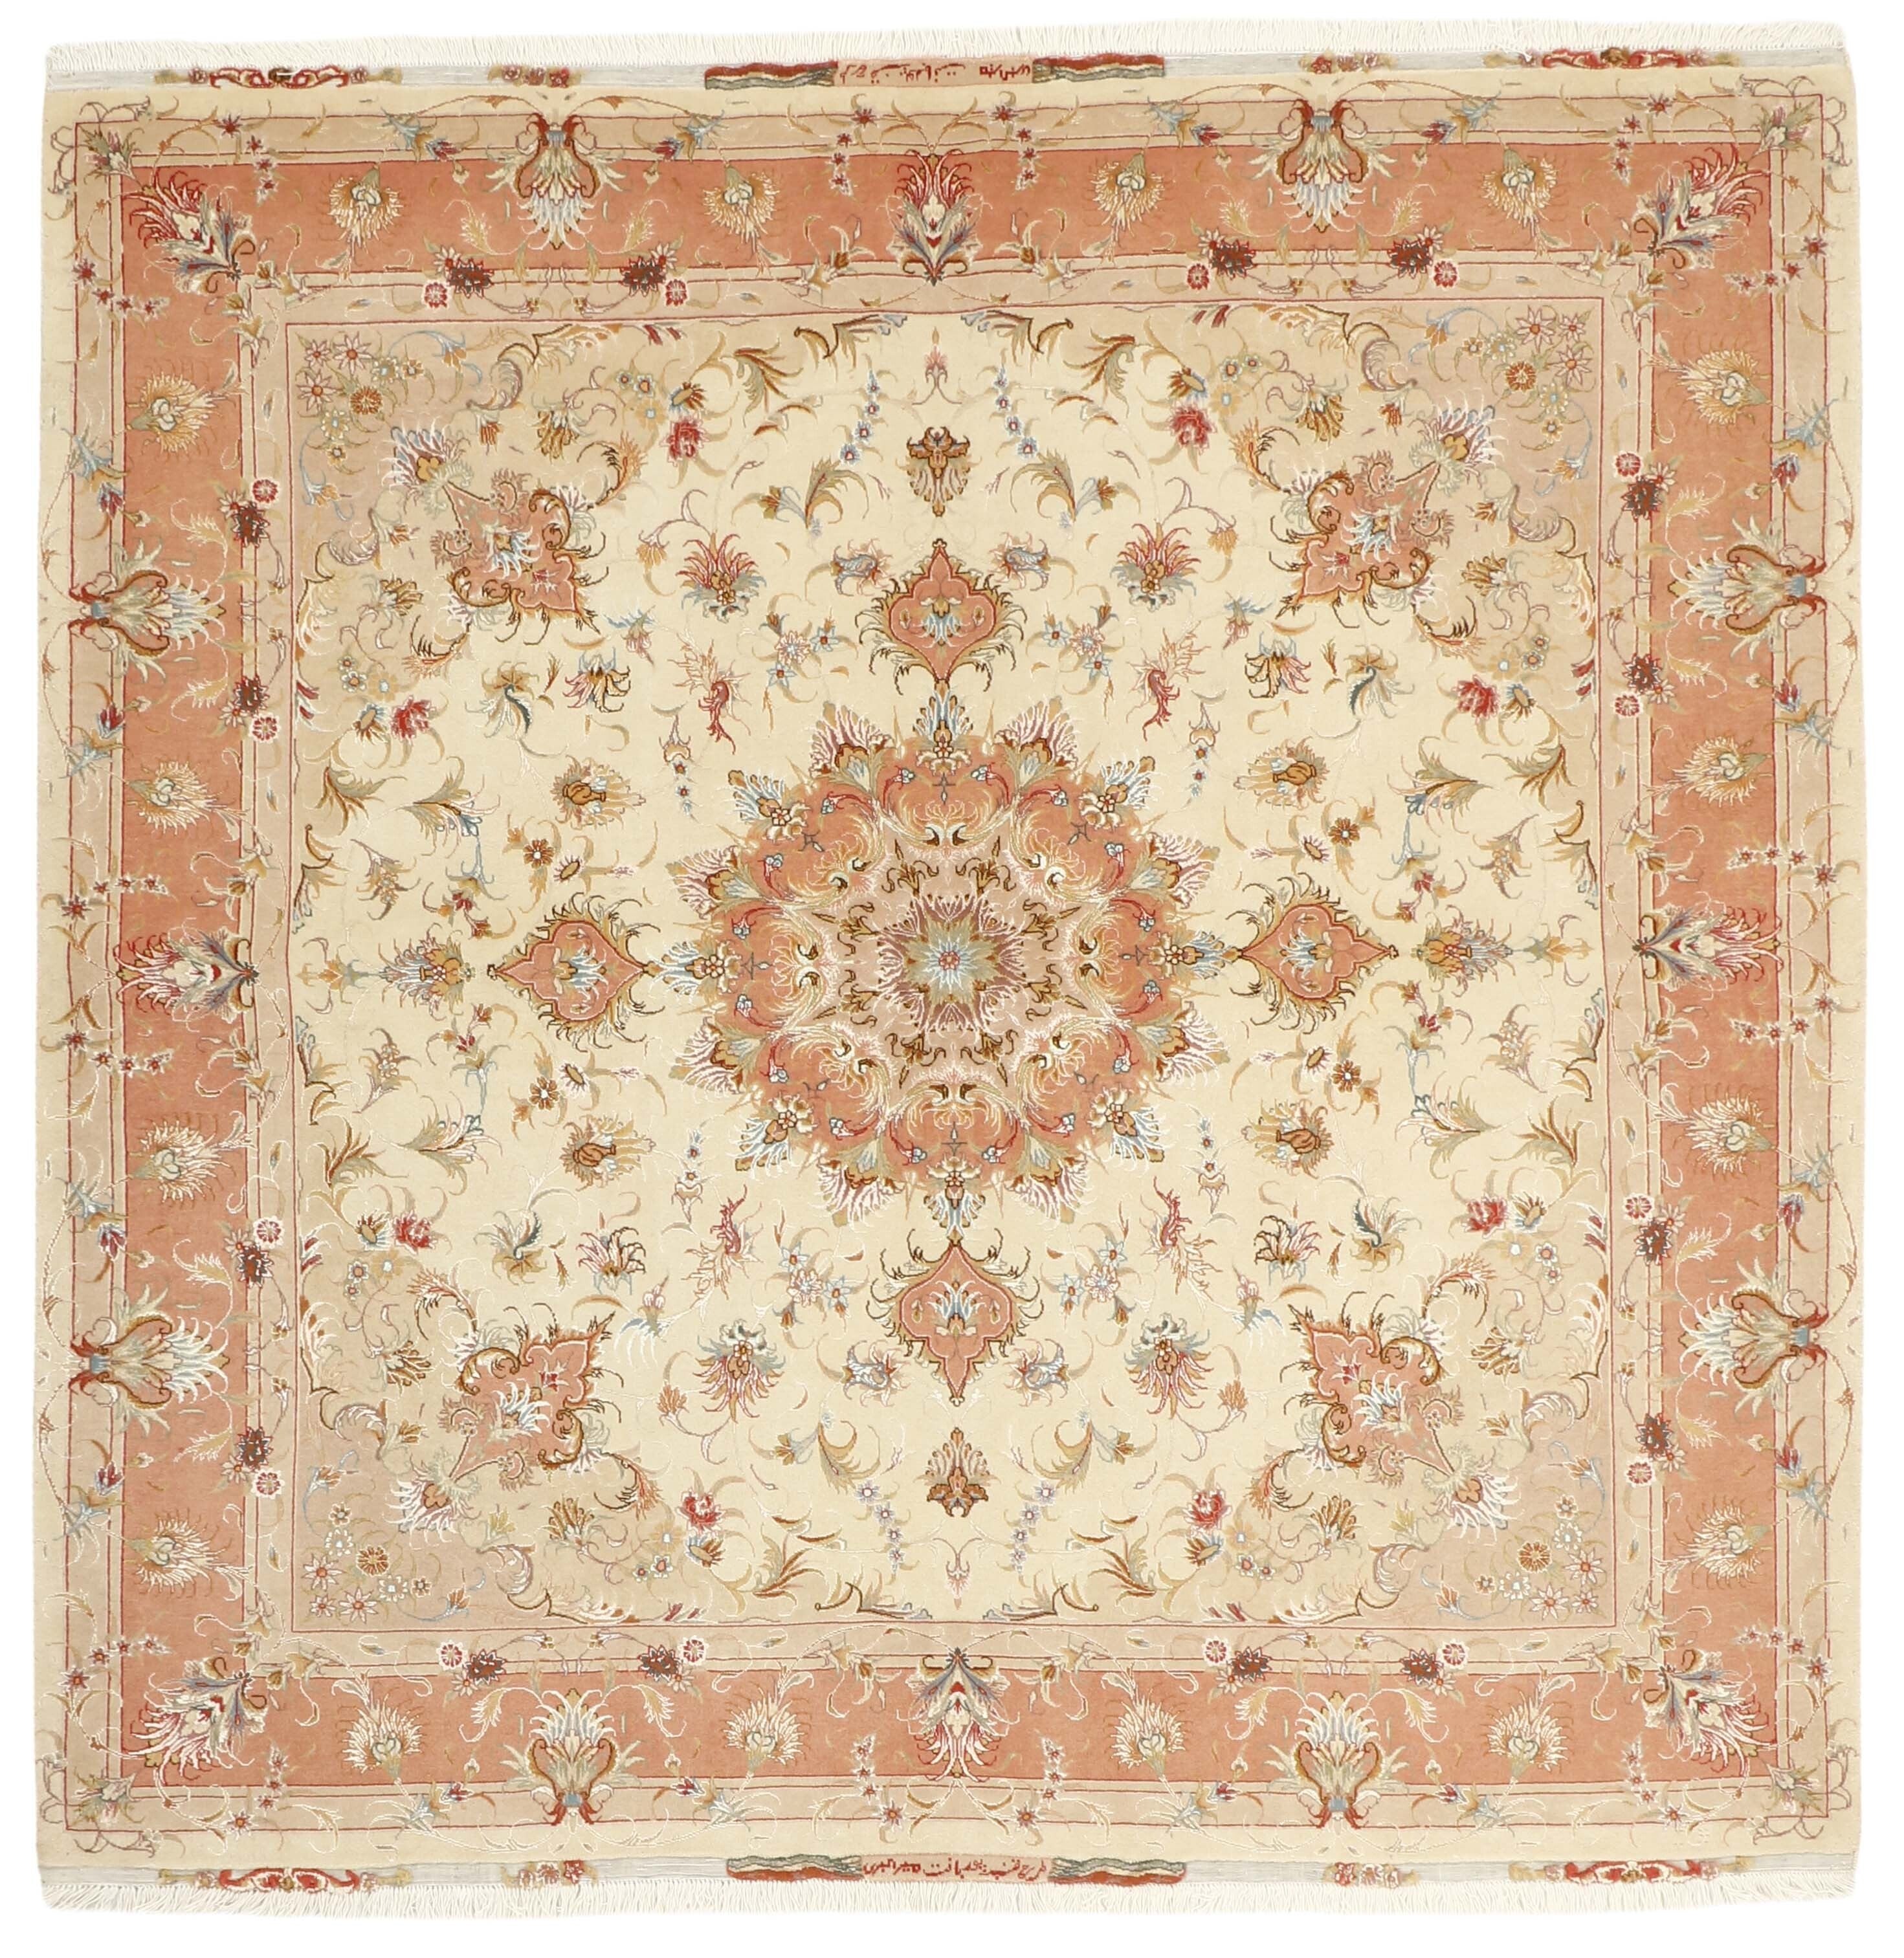 Authentic persian square rug with traditional floral design in red, blue and beige